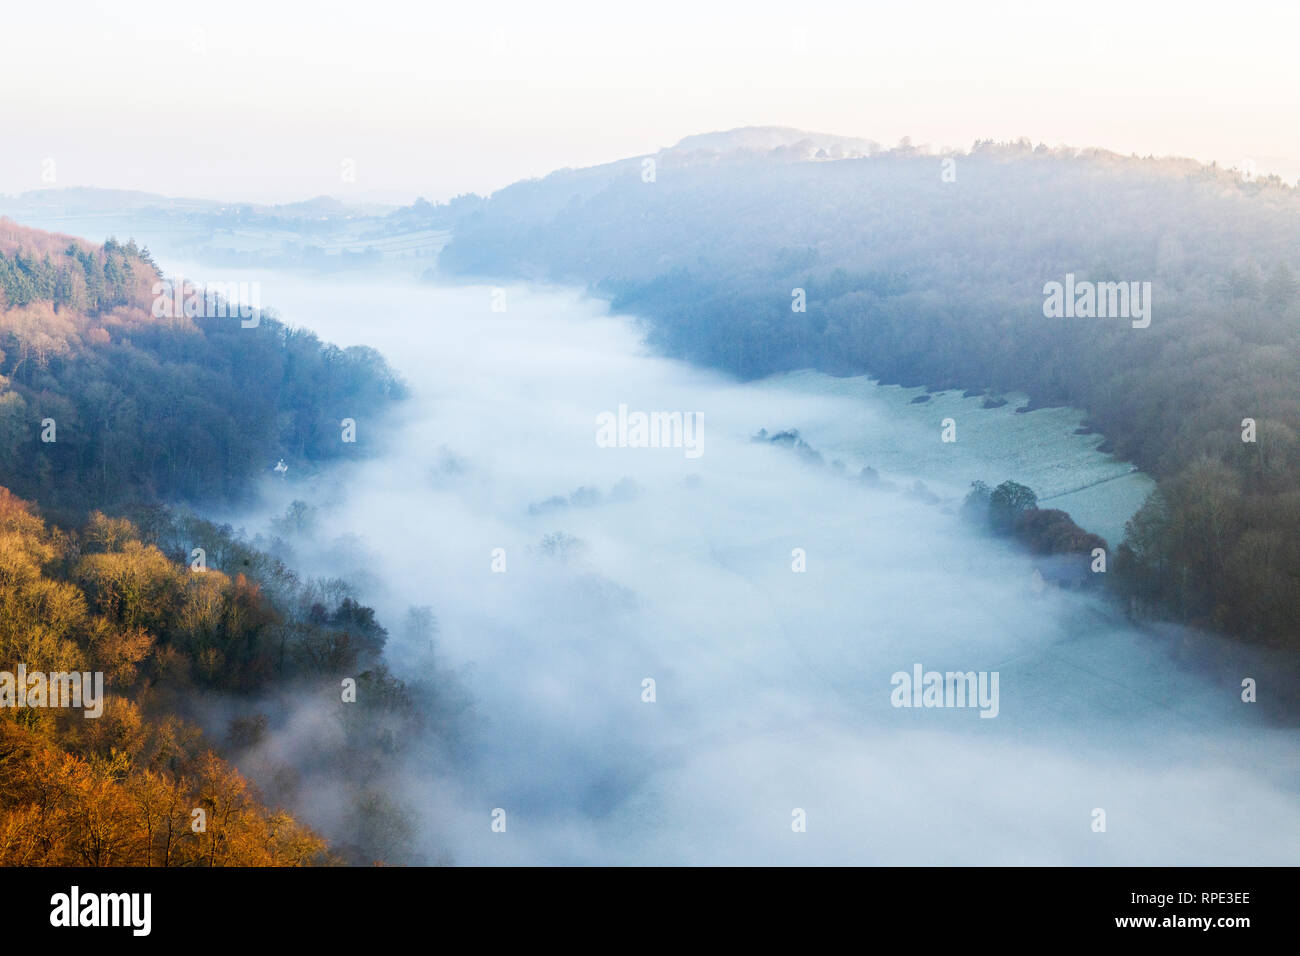 Looking down on the River Wye at Symonds Yat in Gloucestershire seen from Yat Rock  - well, not seen as it is covered in a blanket of mist. Stock Photo